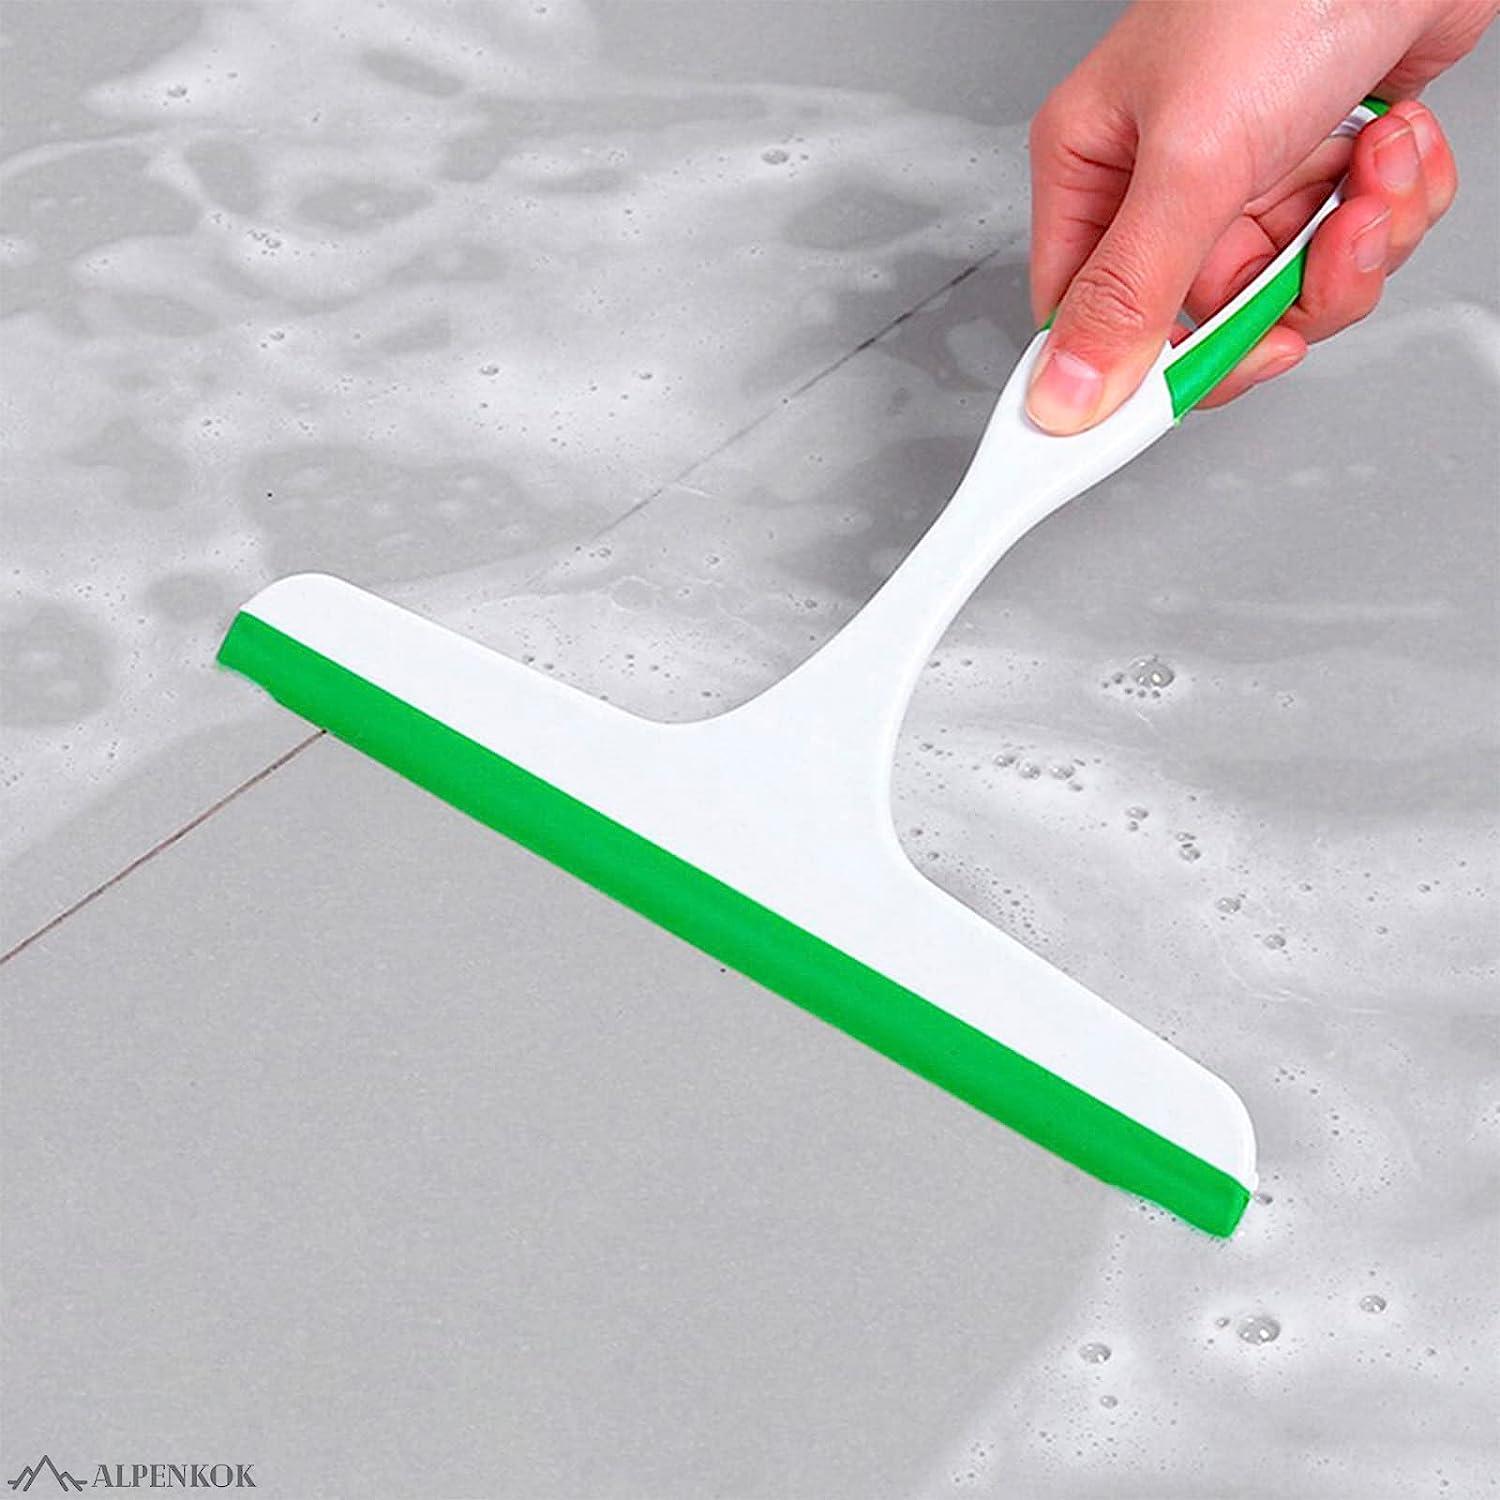 Squeegee For Shower Glass Door Shower Squeegee For Tile Shower Walls Window  Squeegee Window Cleaner Tool For Bathroom